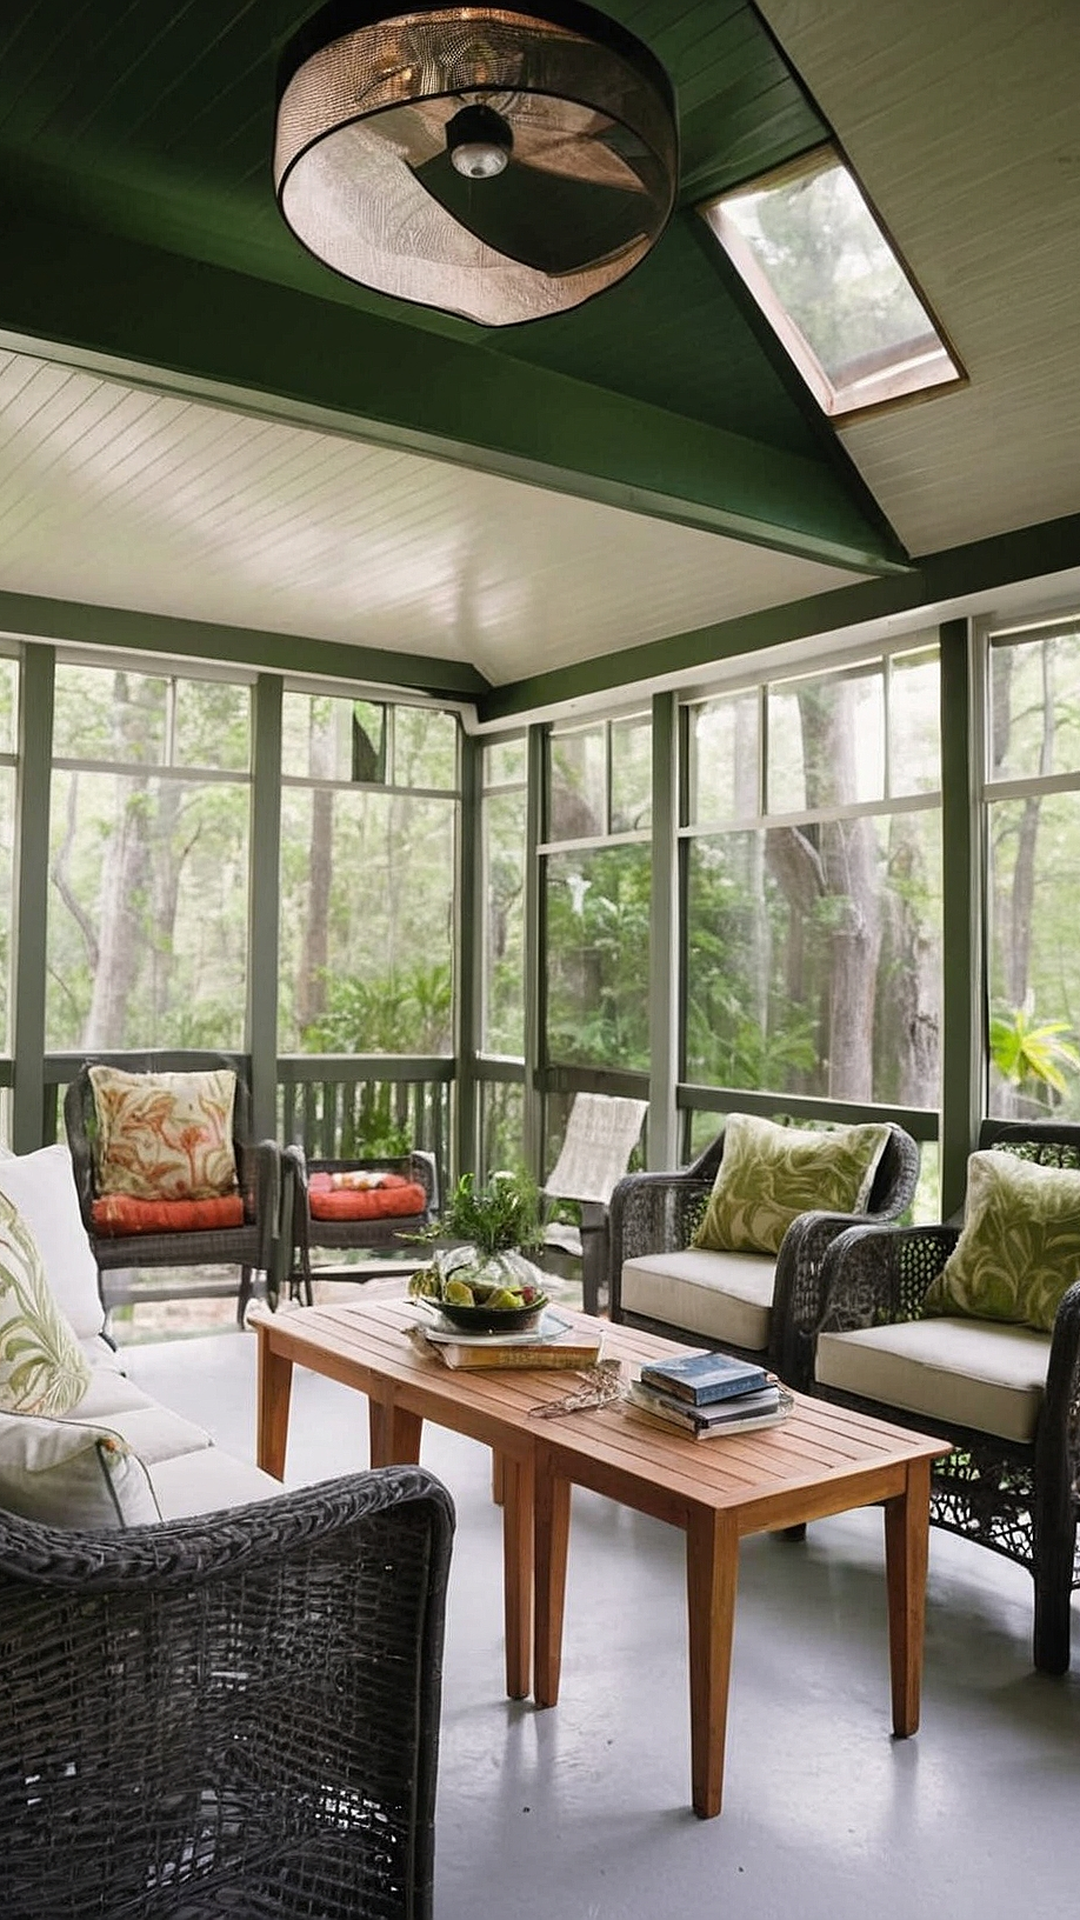 Outdoor Escapes: Screened Porch Vision